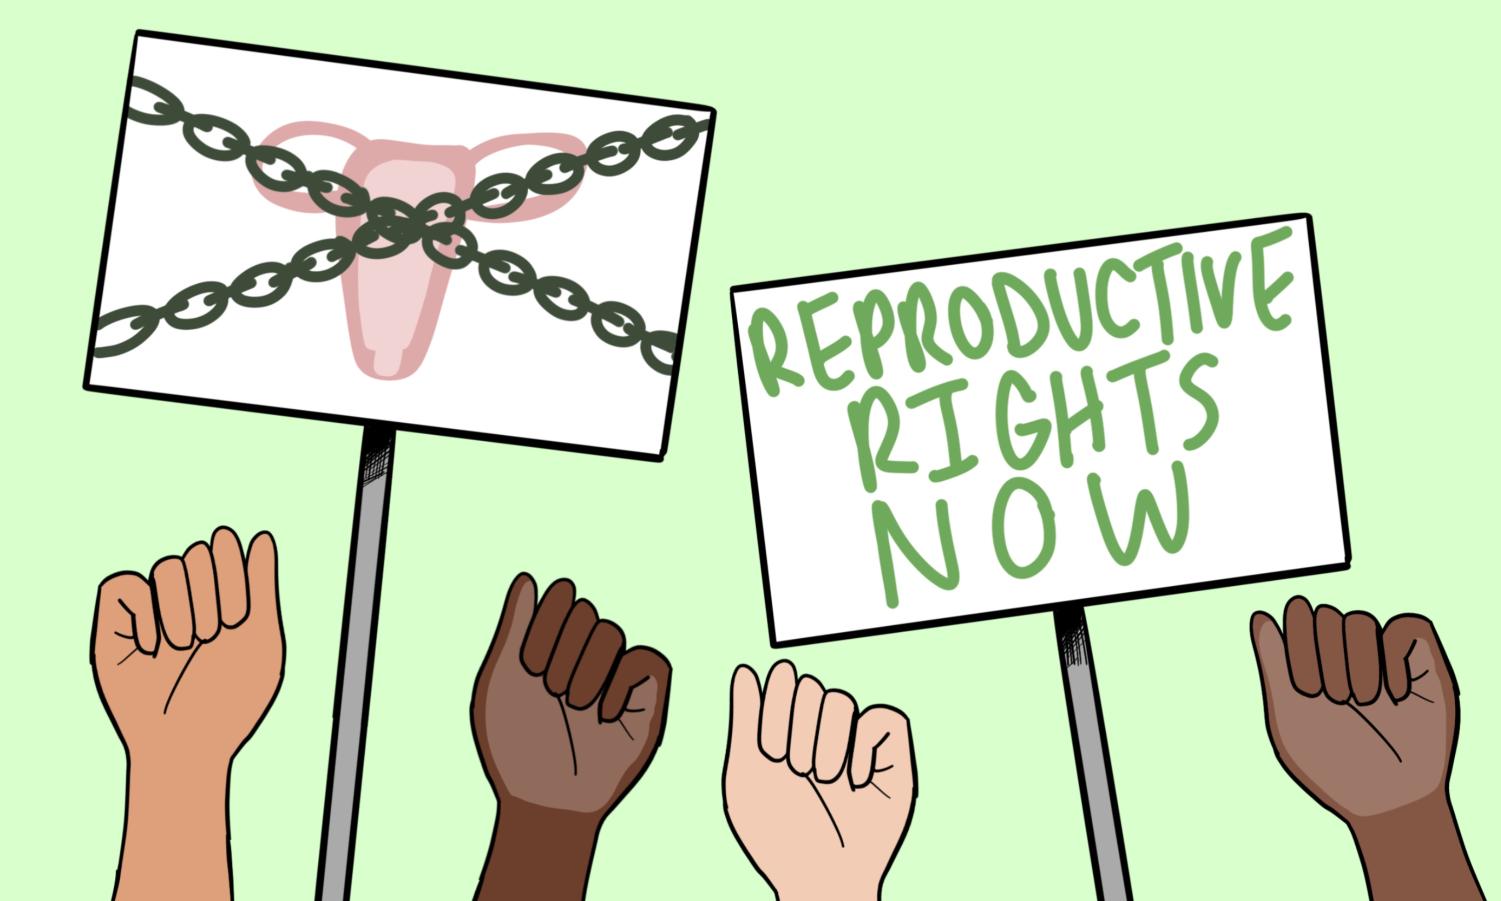 Illustration+of+two+abortion+rights+signs+with+fists+raised+upward+against+a+green+background.